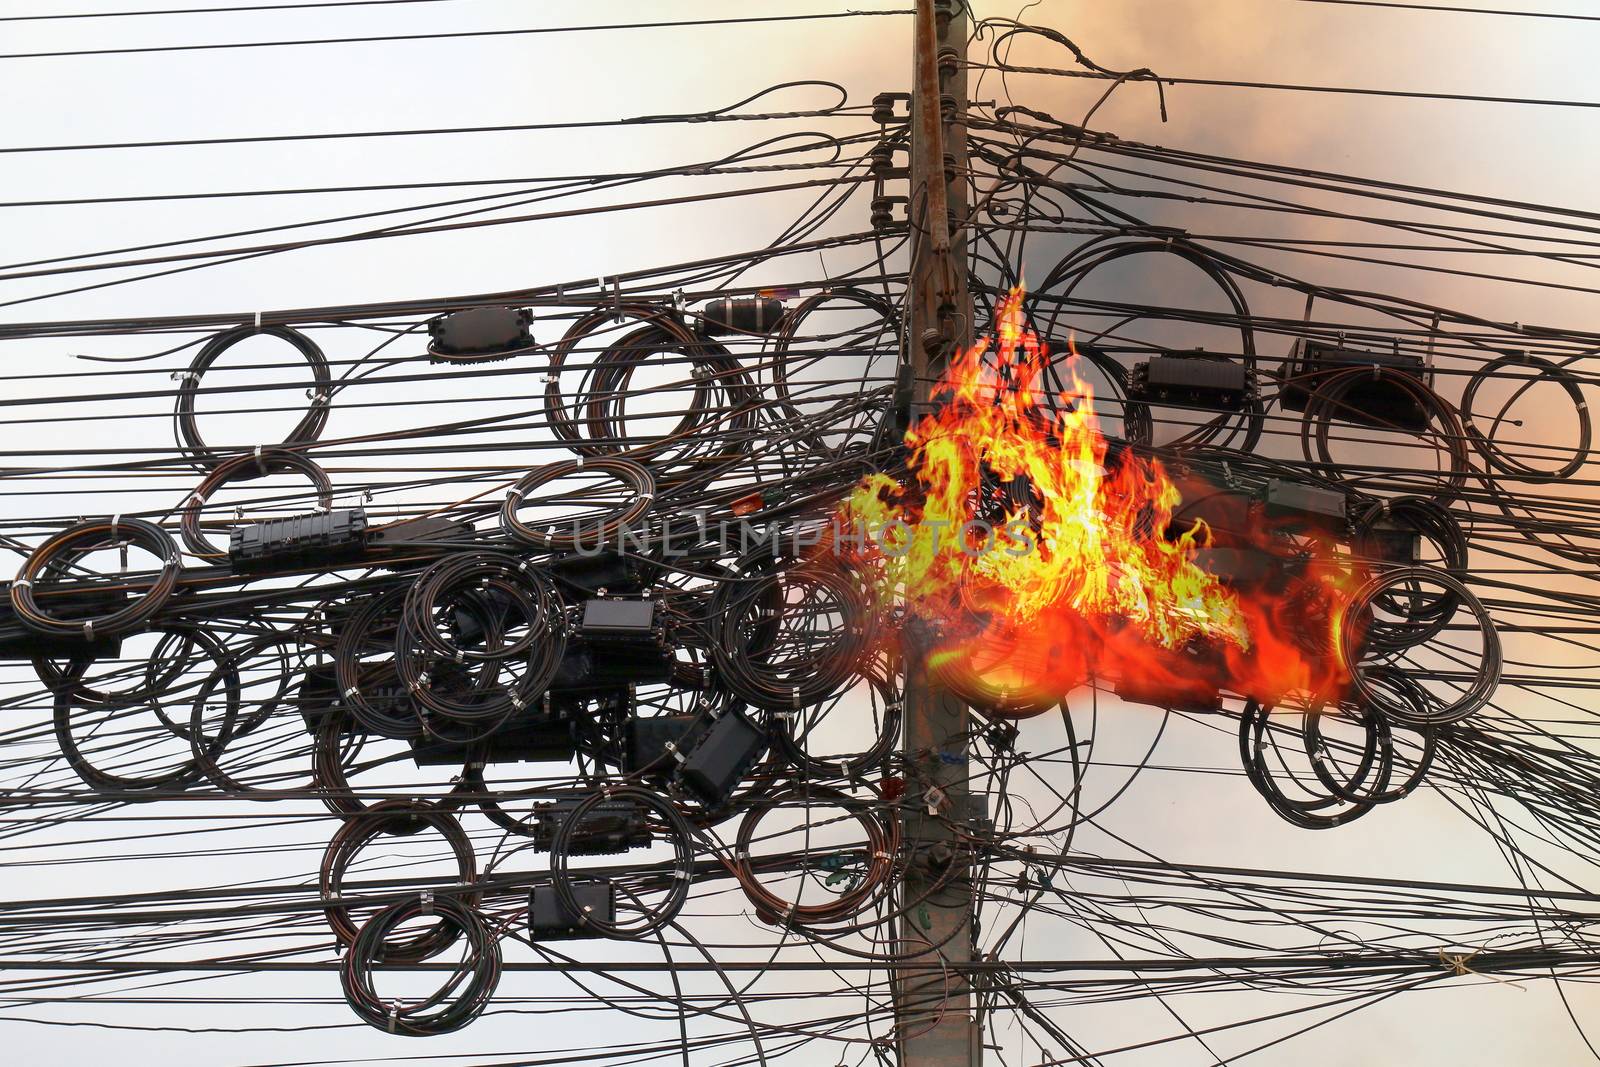 Fire is burning at High Voltage Cables power, Danger wire tangle cord electrical energy by cgdeaw